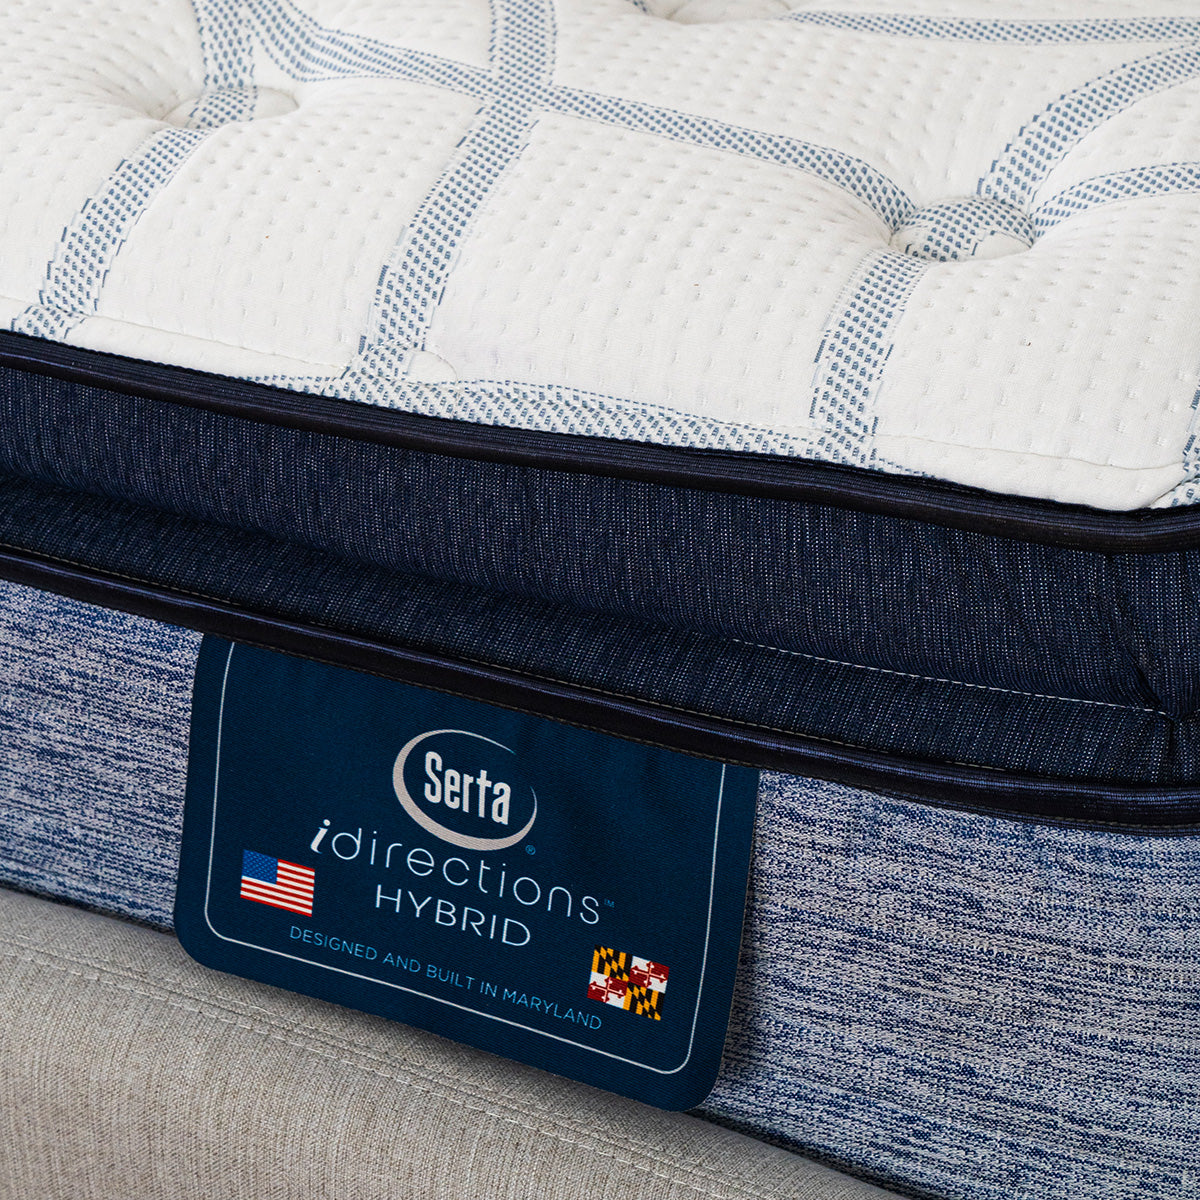 Serta iDirections X5 Hybrid II Plush Pillow Top Mattress Product Tag Detail Shot, Designed and built in Maryland